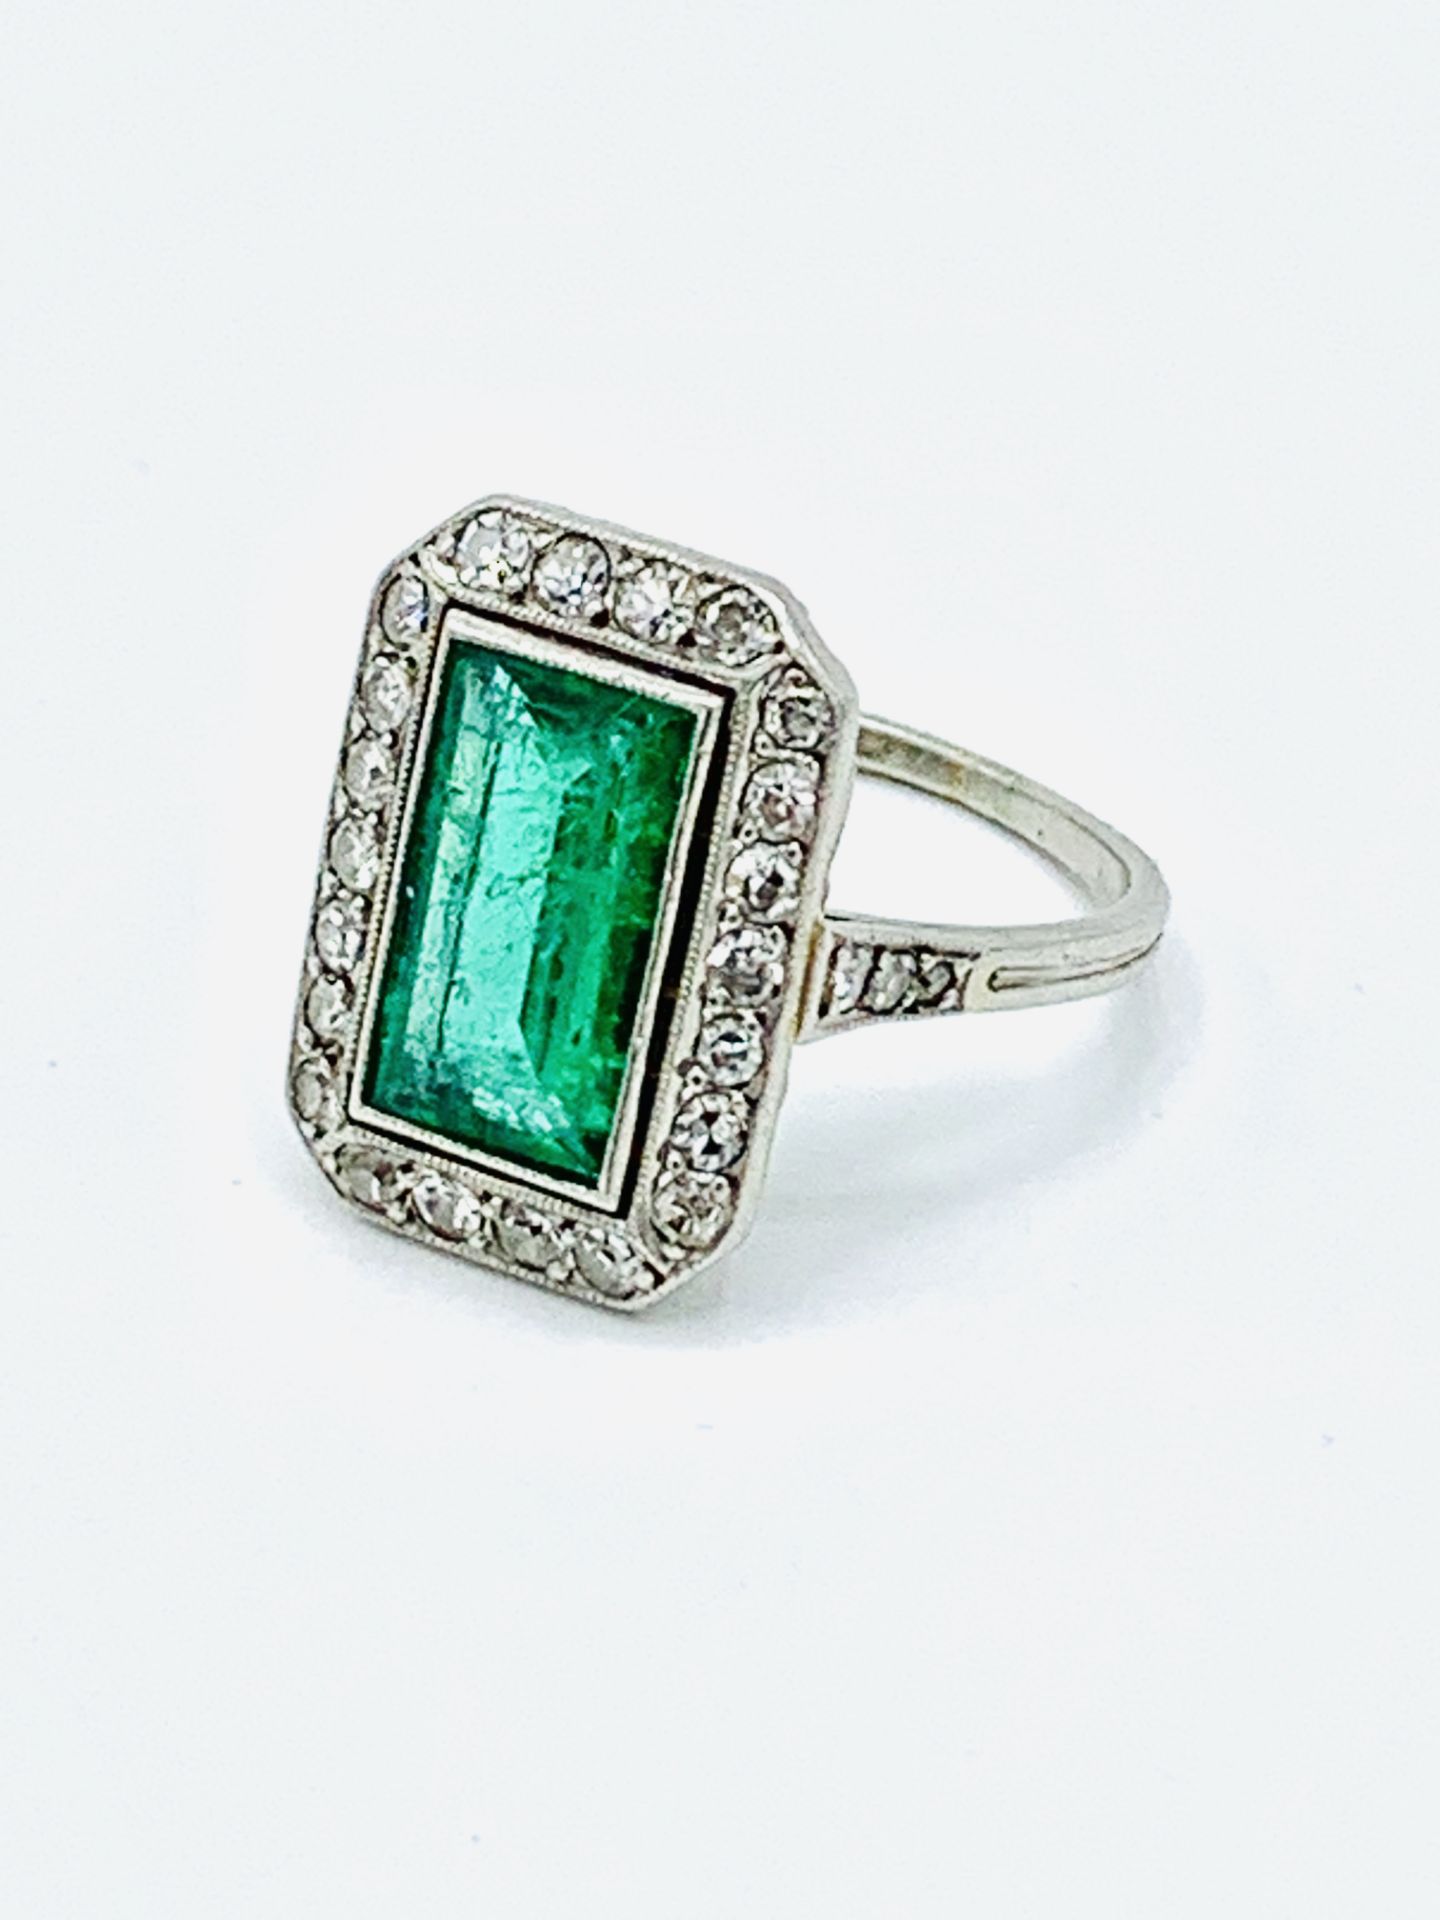 18ct white gold diamond and emerald ring. - Image 3 of 5